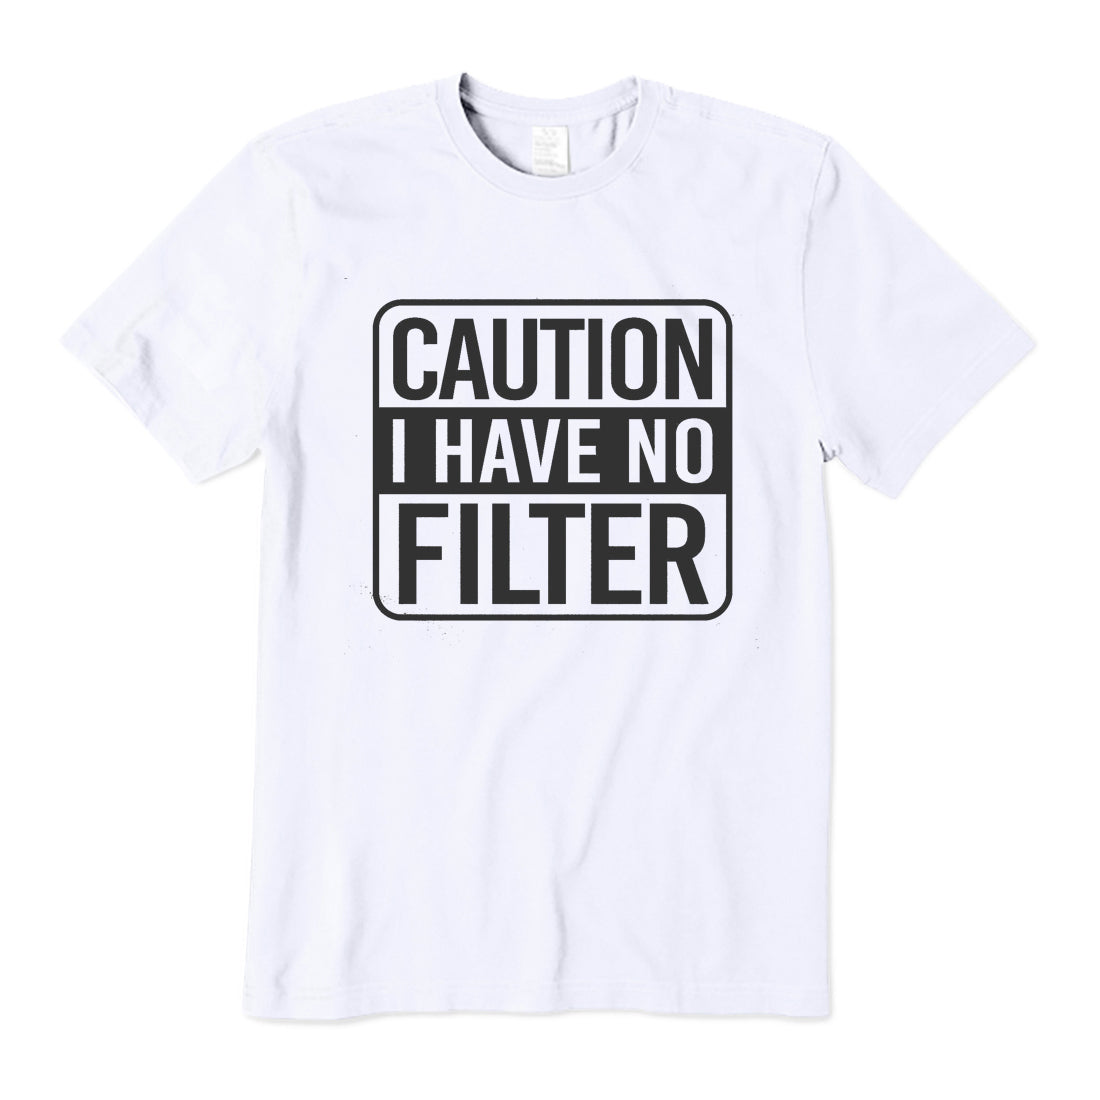 Caution I Have No Filter T-Shirt